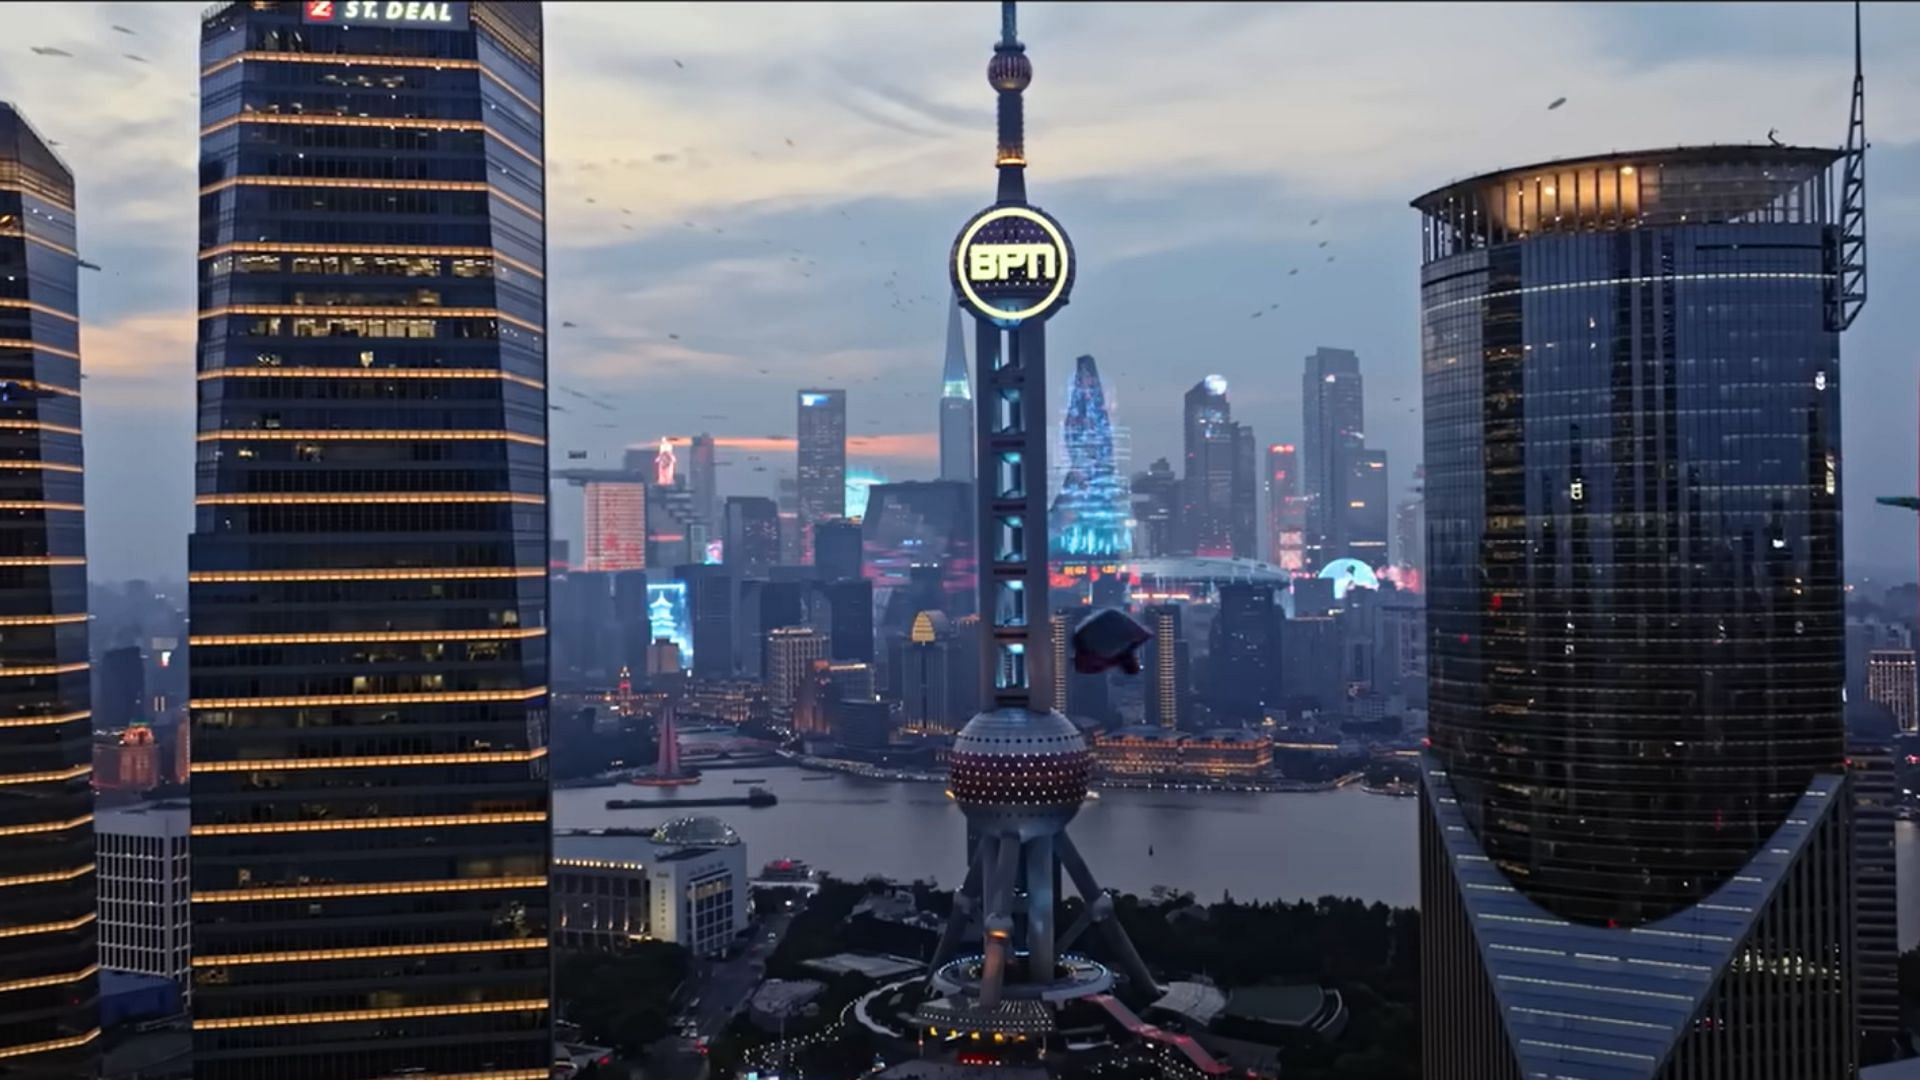 Shanghai&#039;s tallest tower is visible in one of the shots. (Image via Netflix)